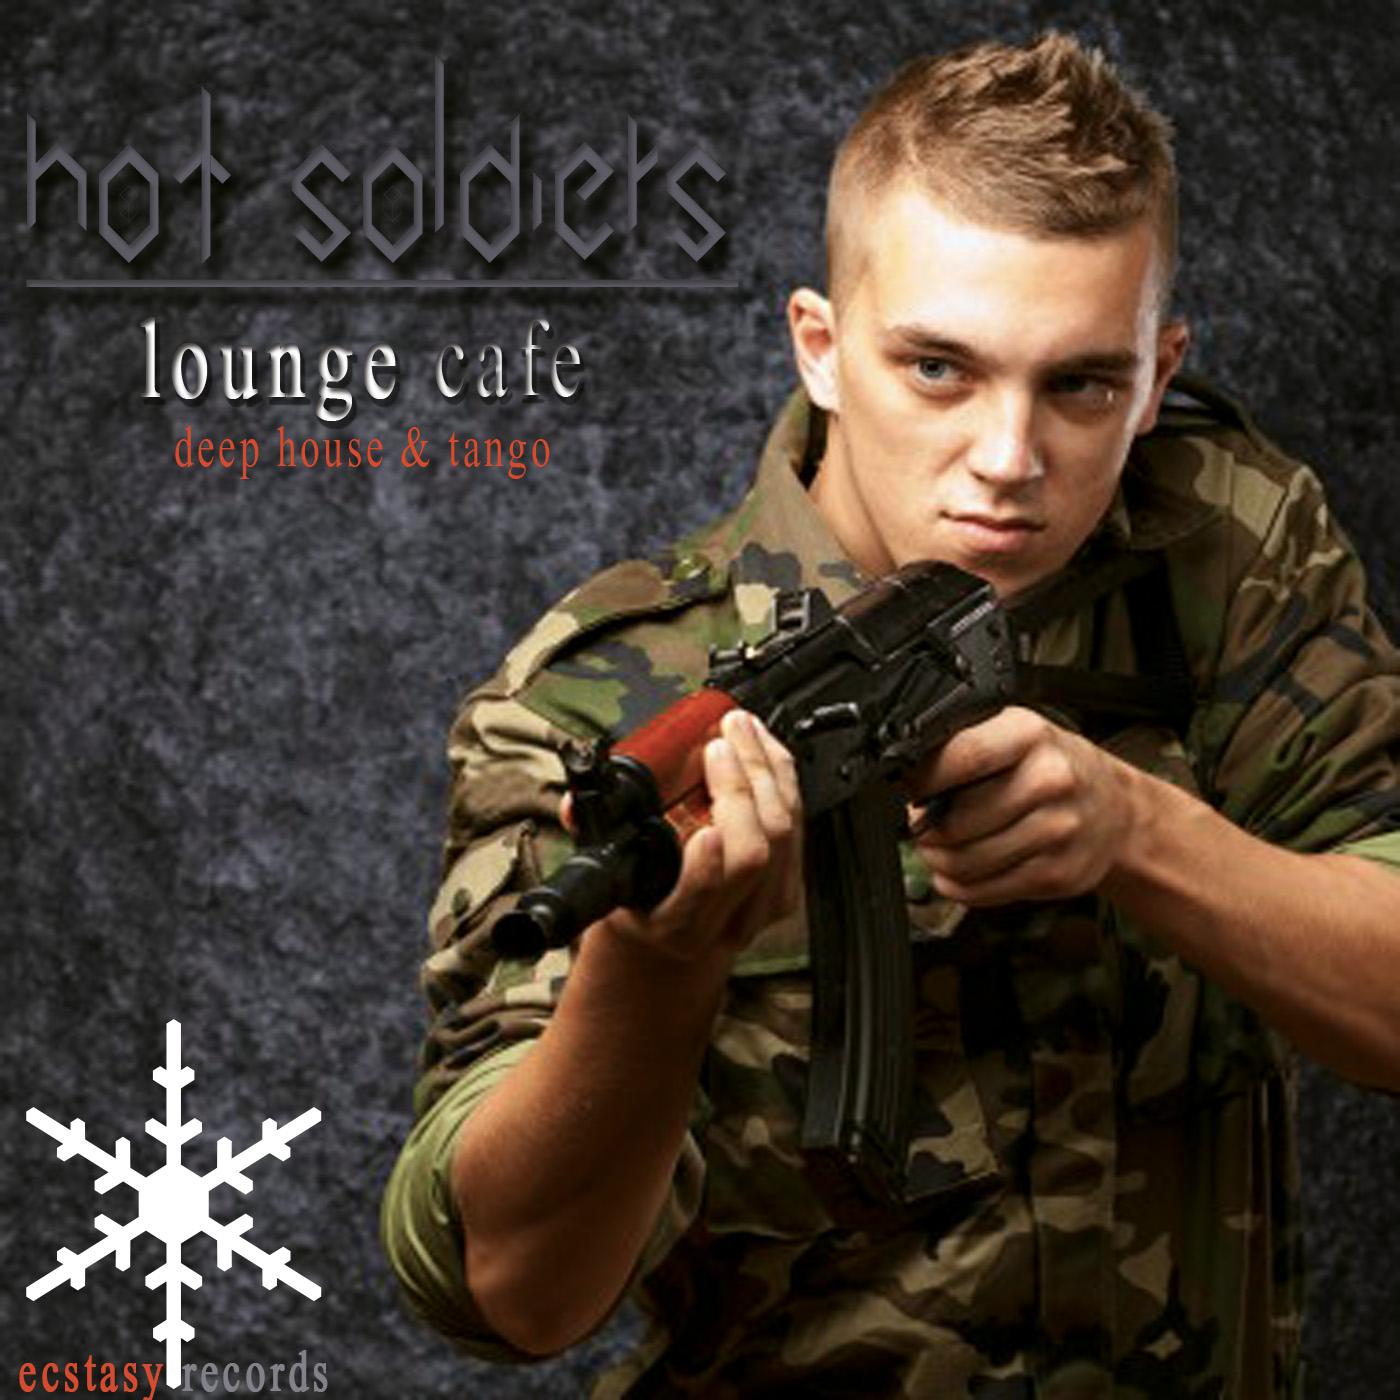 Hot Soldiers Lounge Cafe - Deep House & Tango